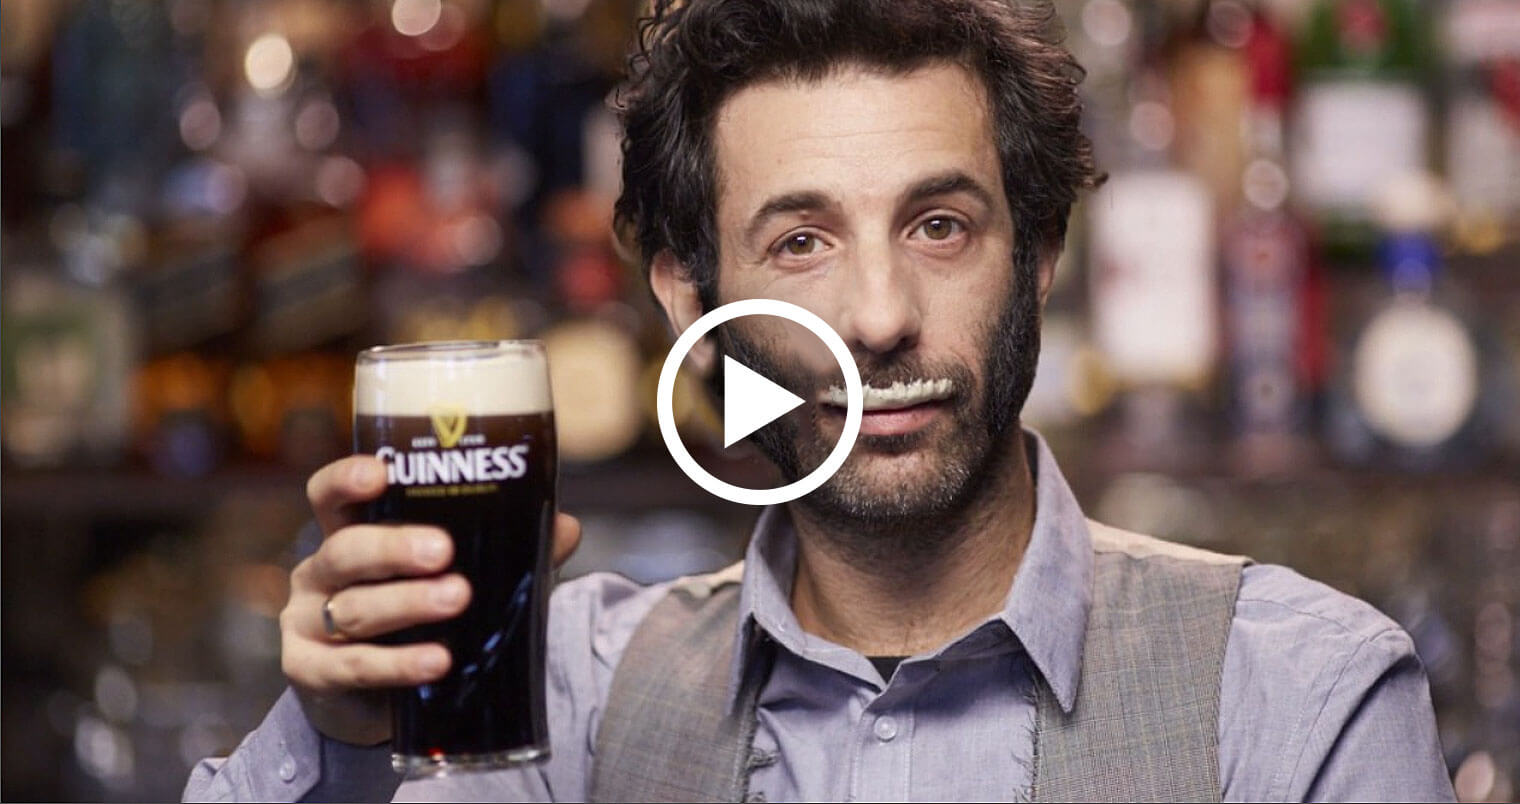 guiness give a stache